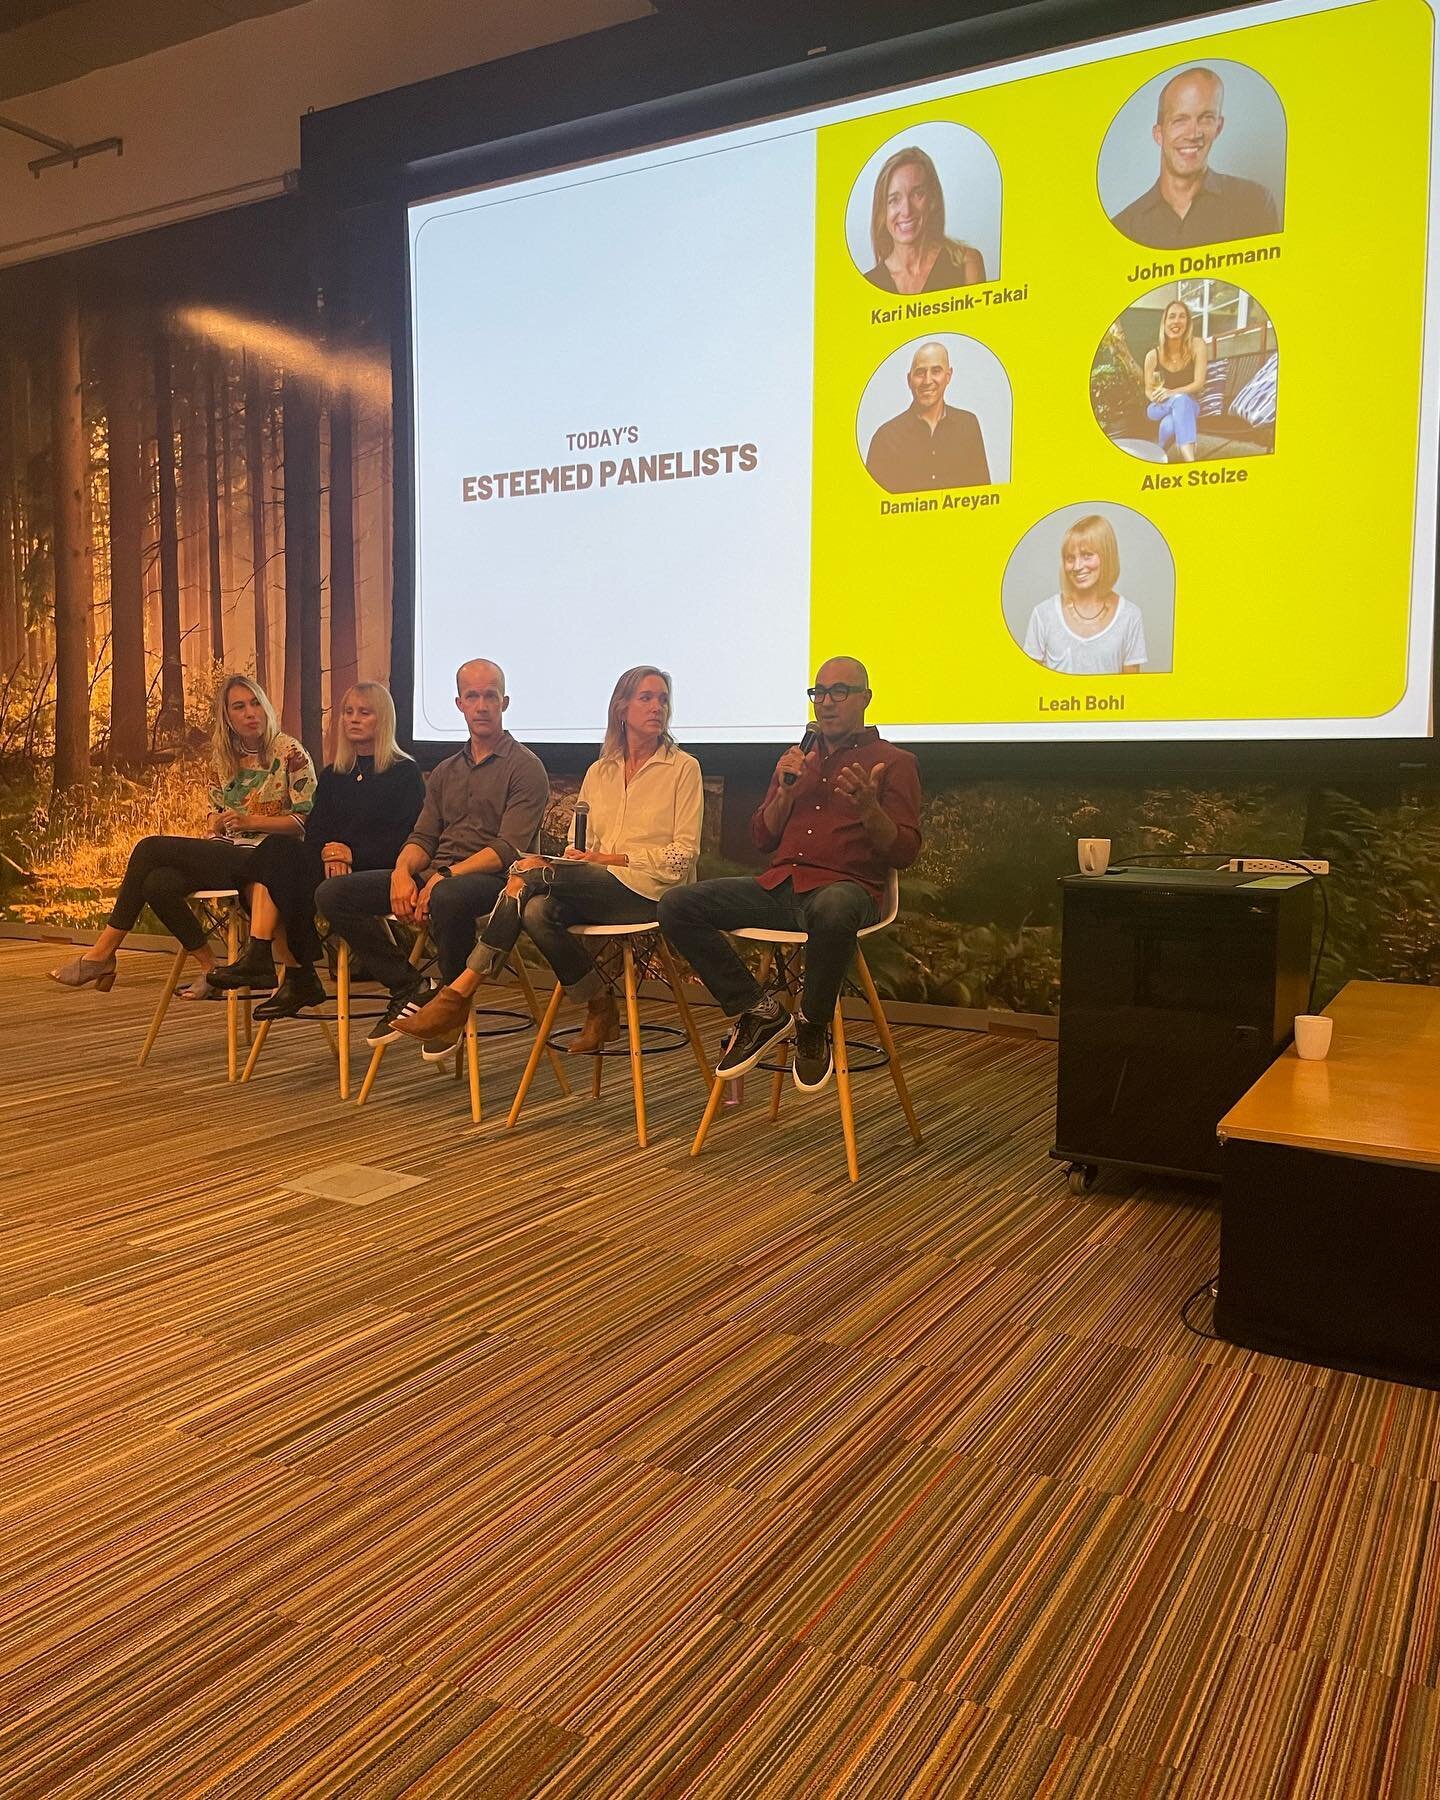 A HUGE shoutout to our incredible panelists, participants, and project managers for making our Mentorship Panel a resounding success! 🙌🔥 We're thrilled to have launched this exhilarating journey, embracing the wisdom and expertise of our panelists.